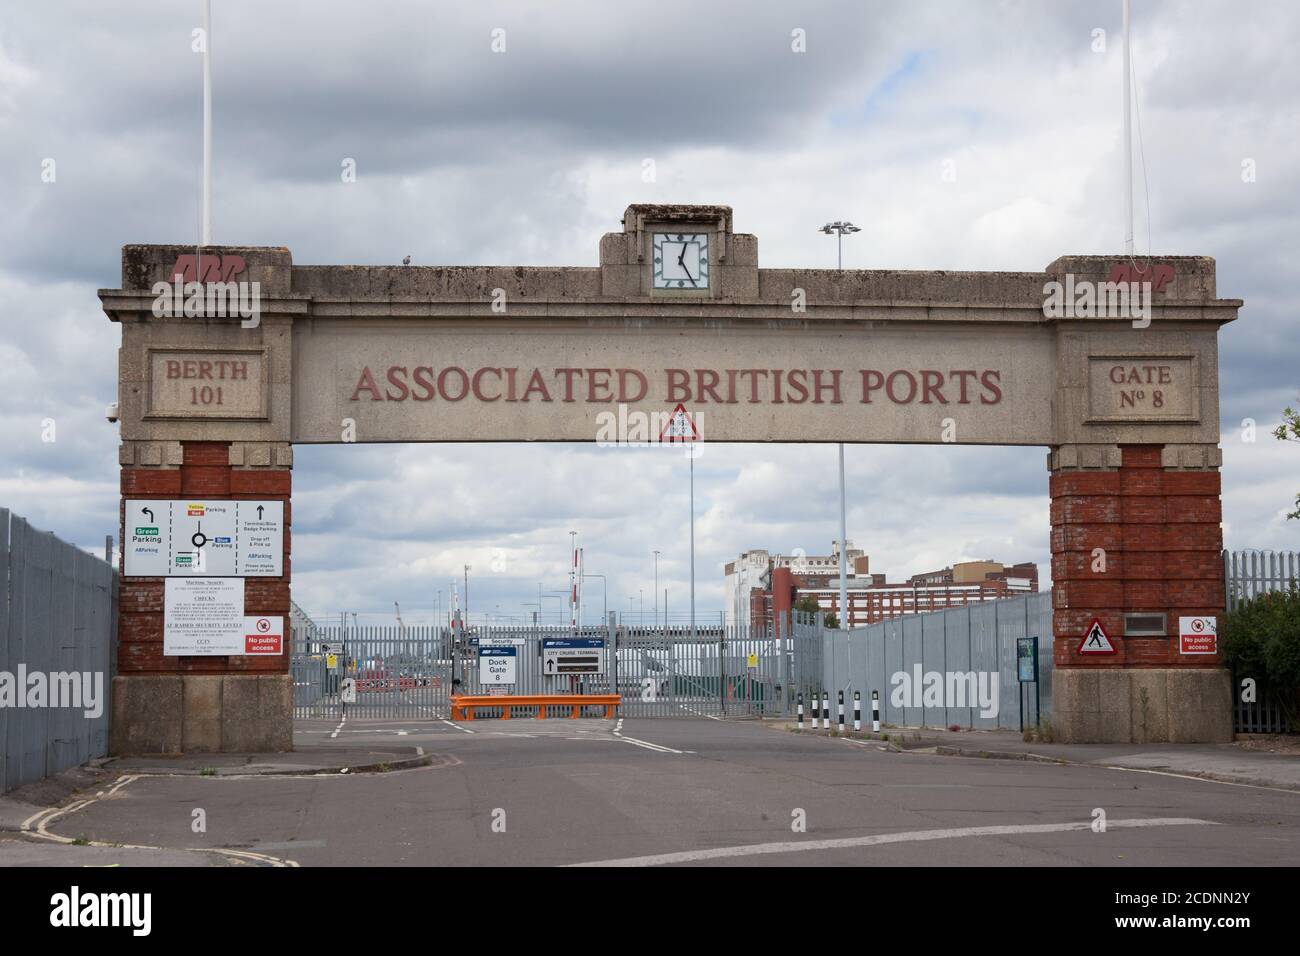 Gate 8 at The Associated British Port at Southampton in Hampshire, UK Stock Photo